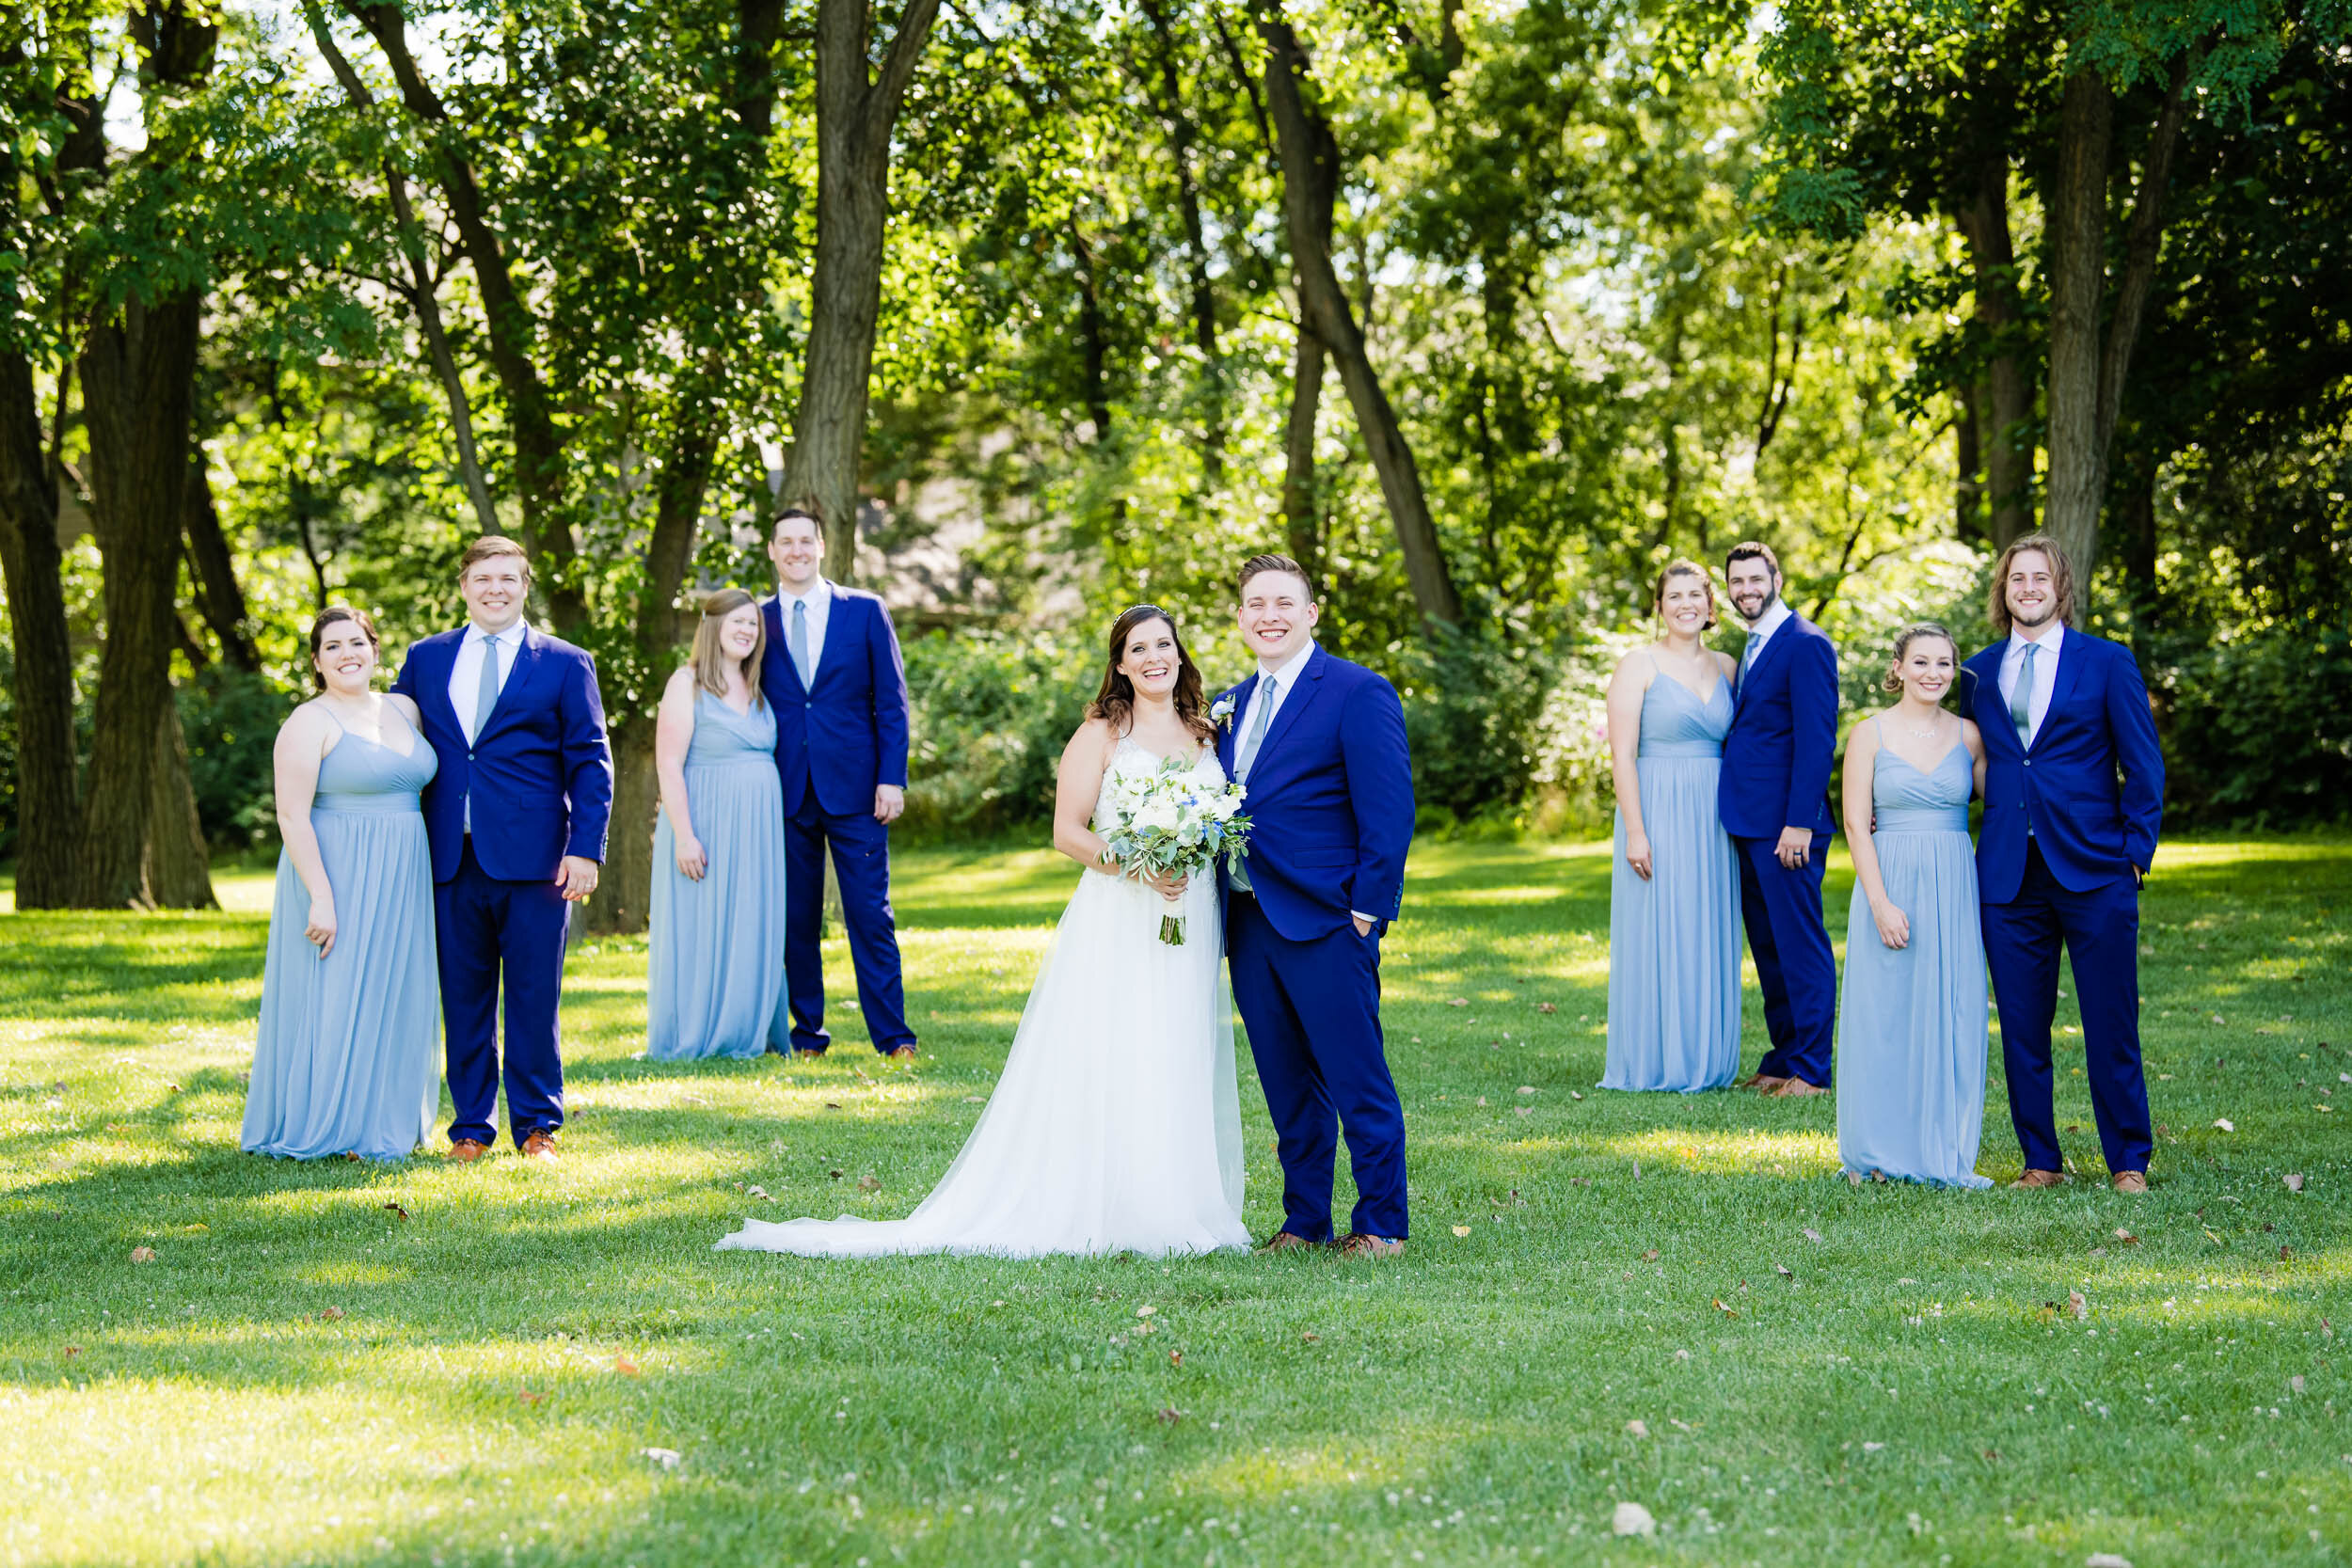 Wedding party group photo:  Chicago backyard wedding photographed by J. Brown Photography.